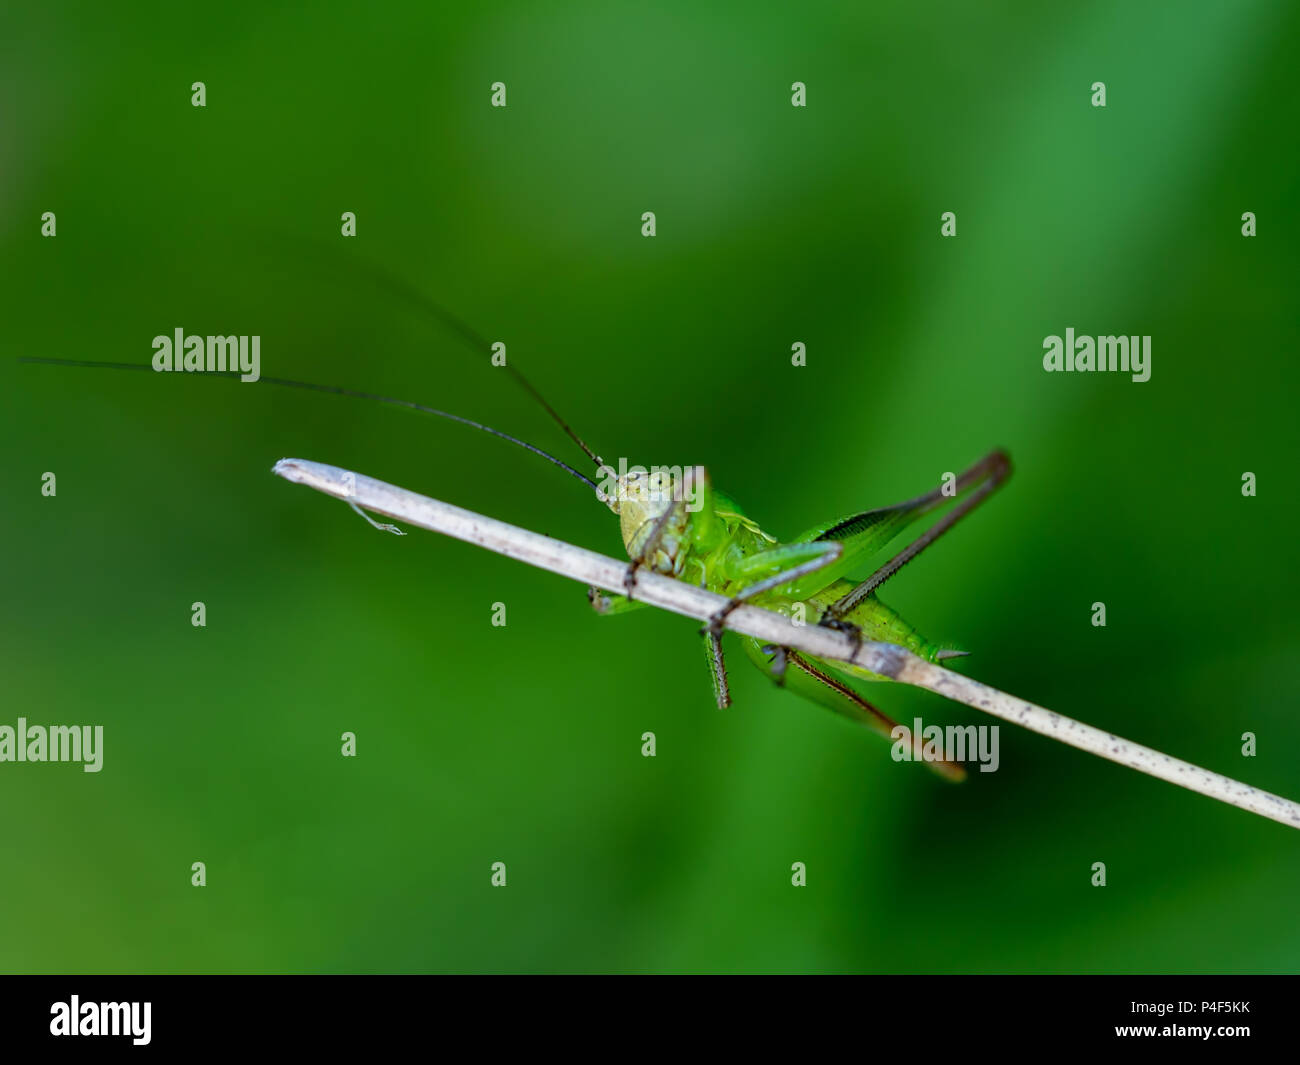 Cute babay cricket insect. Looks wary! Clinging onto twig. Stock Photo